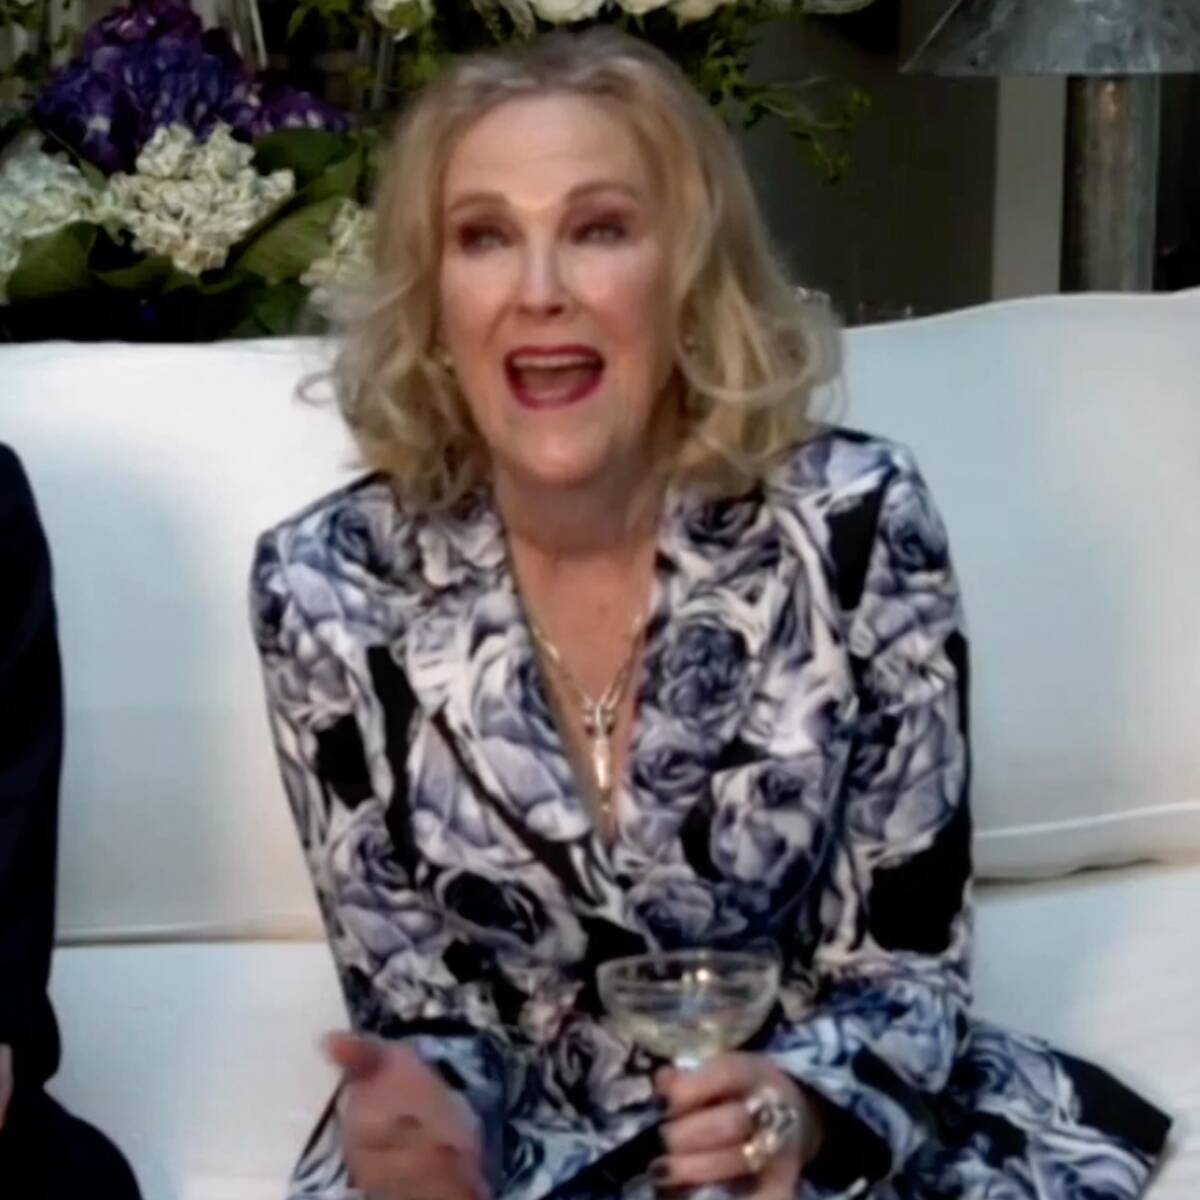 Of Course Schitt's Creek's Catherine O'Hara Celebrated Her First Golden Globe Win With a Martini